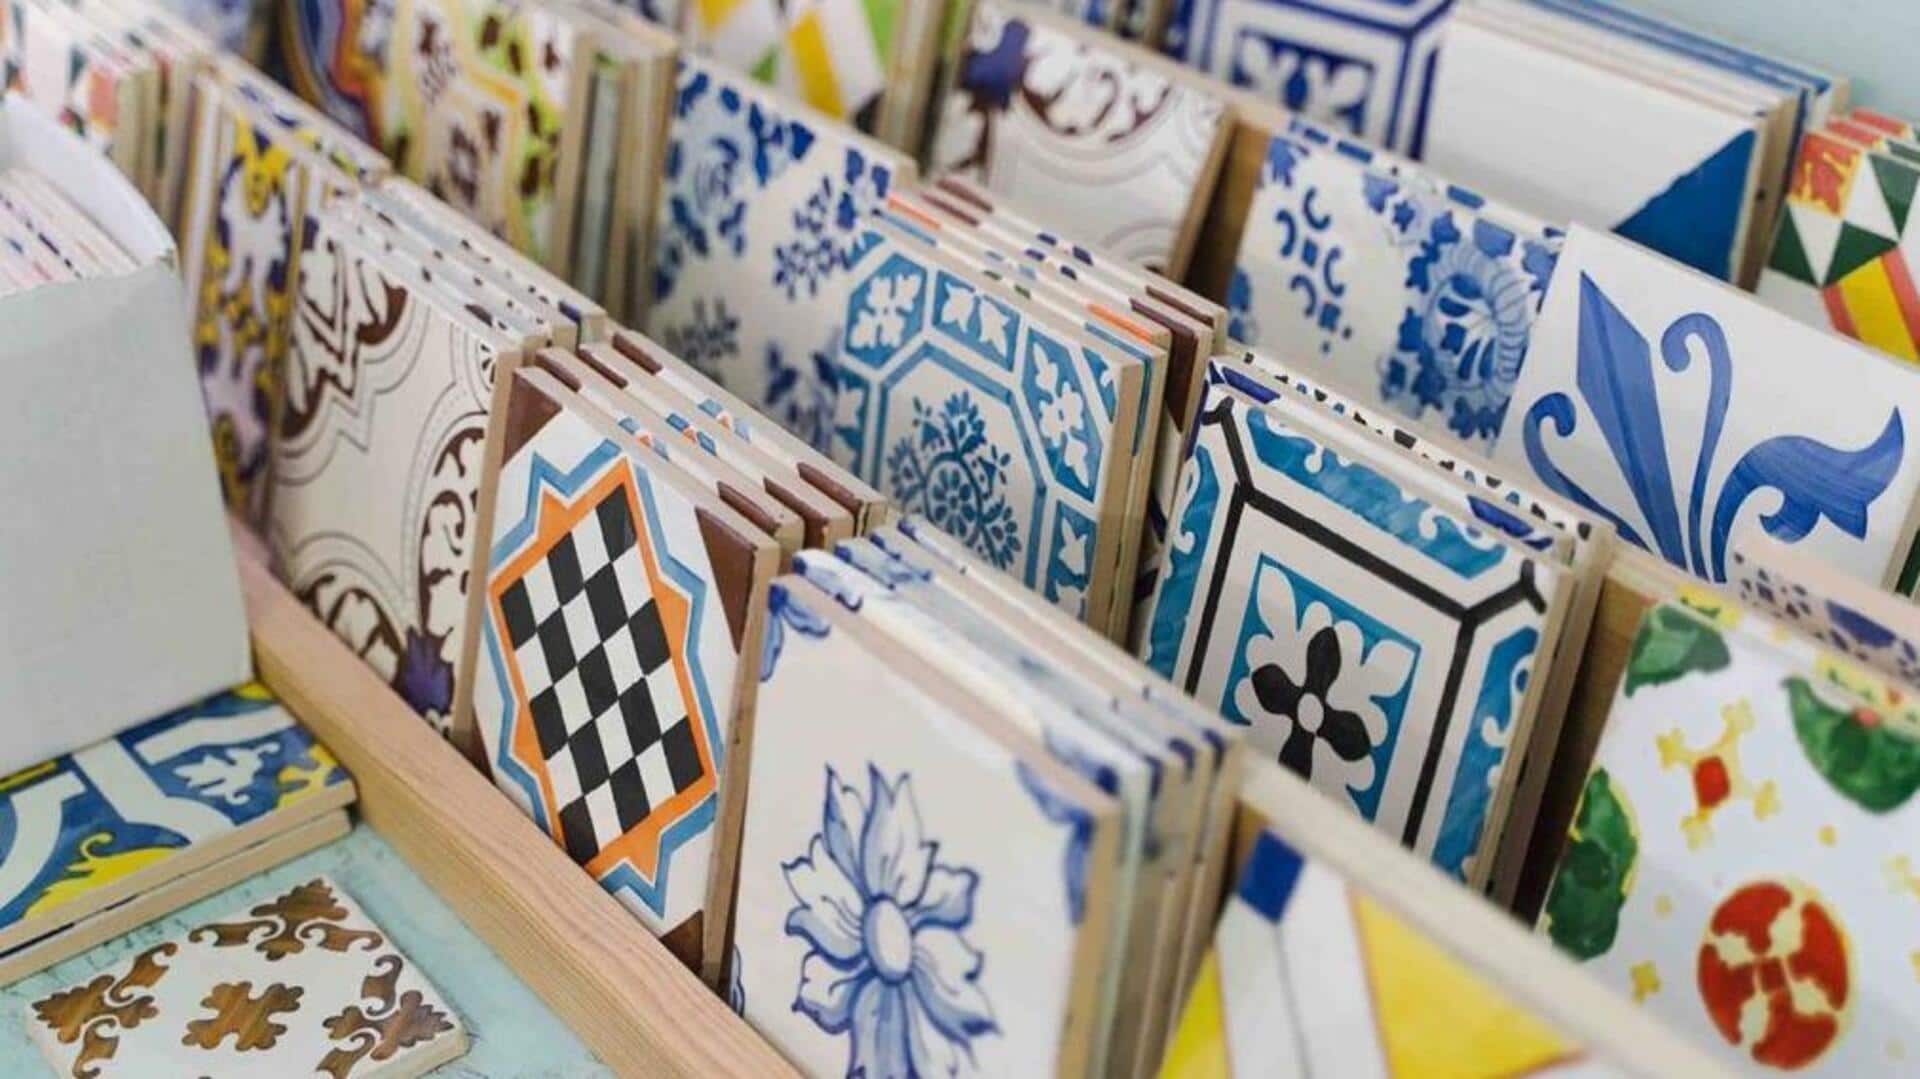 A guide to Lisbon's azulejo artisan heritage